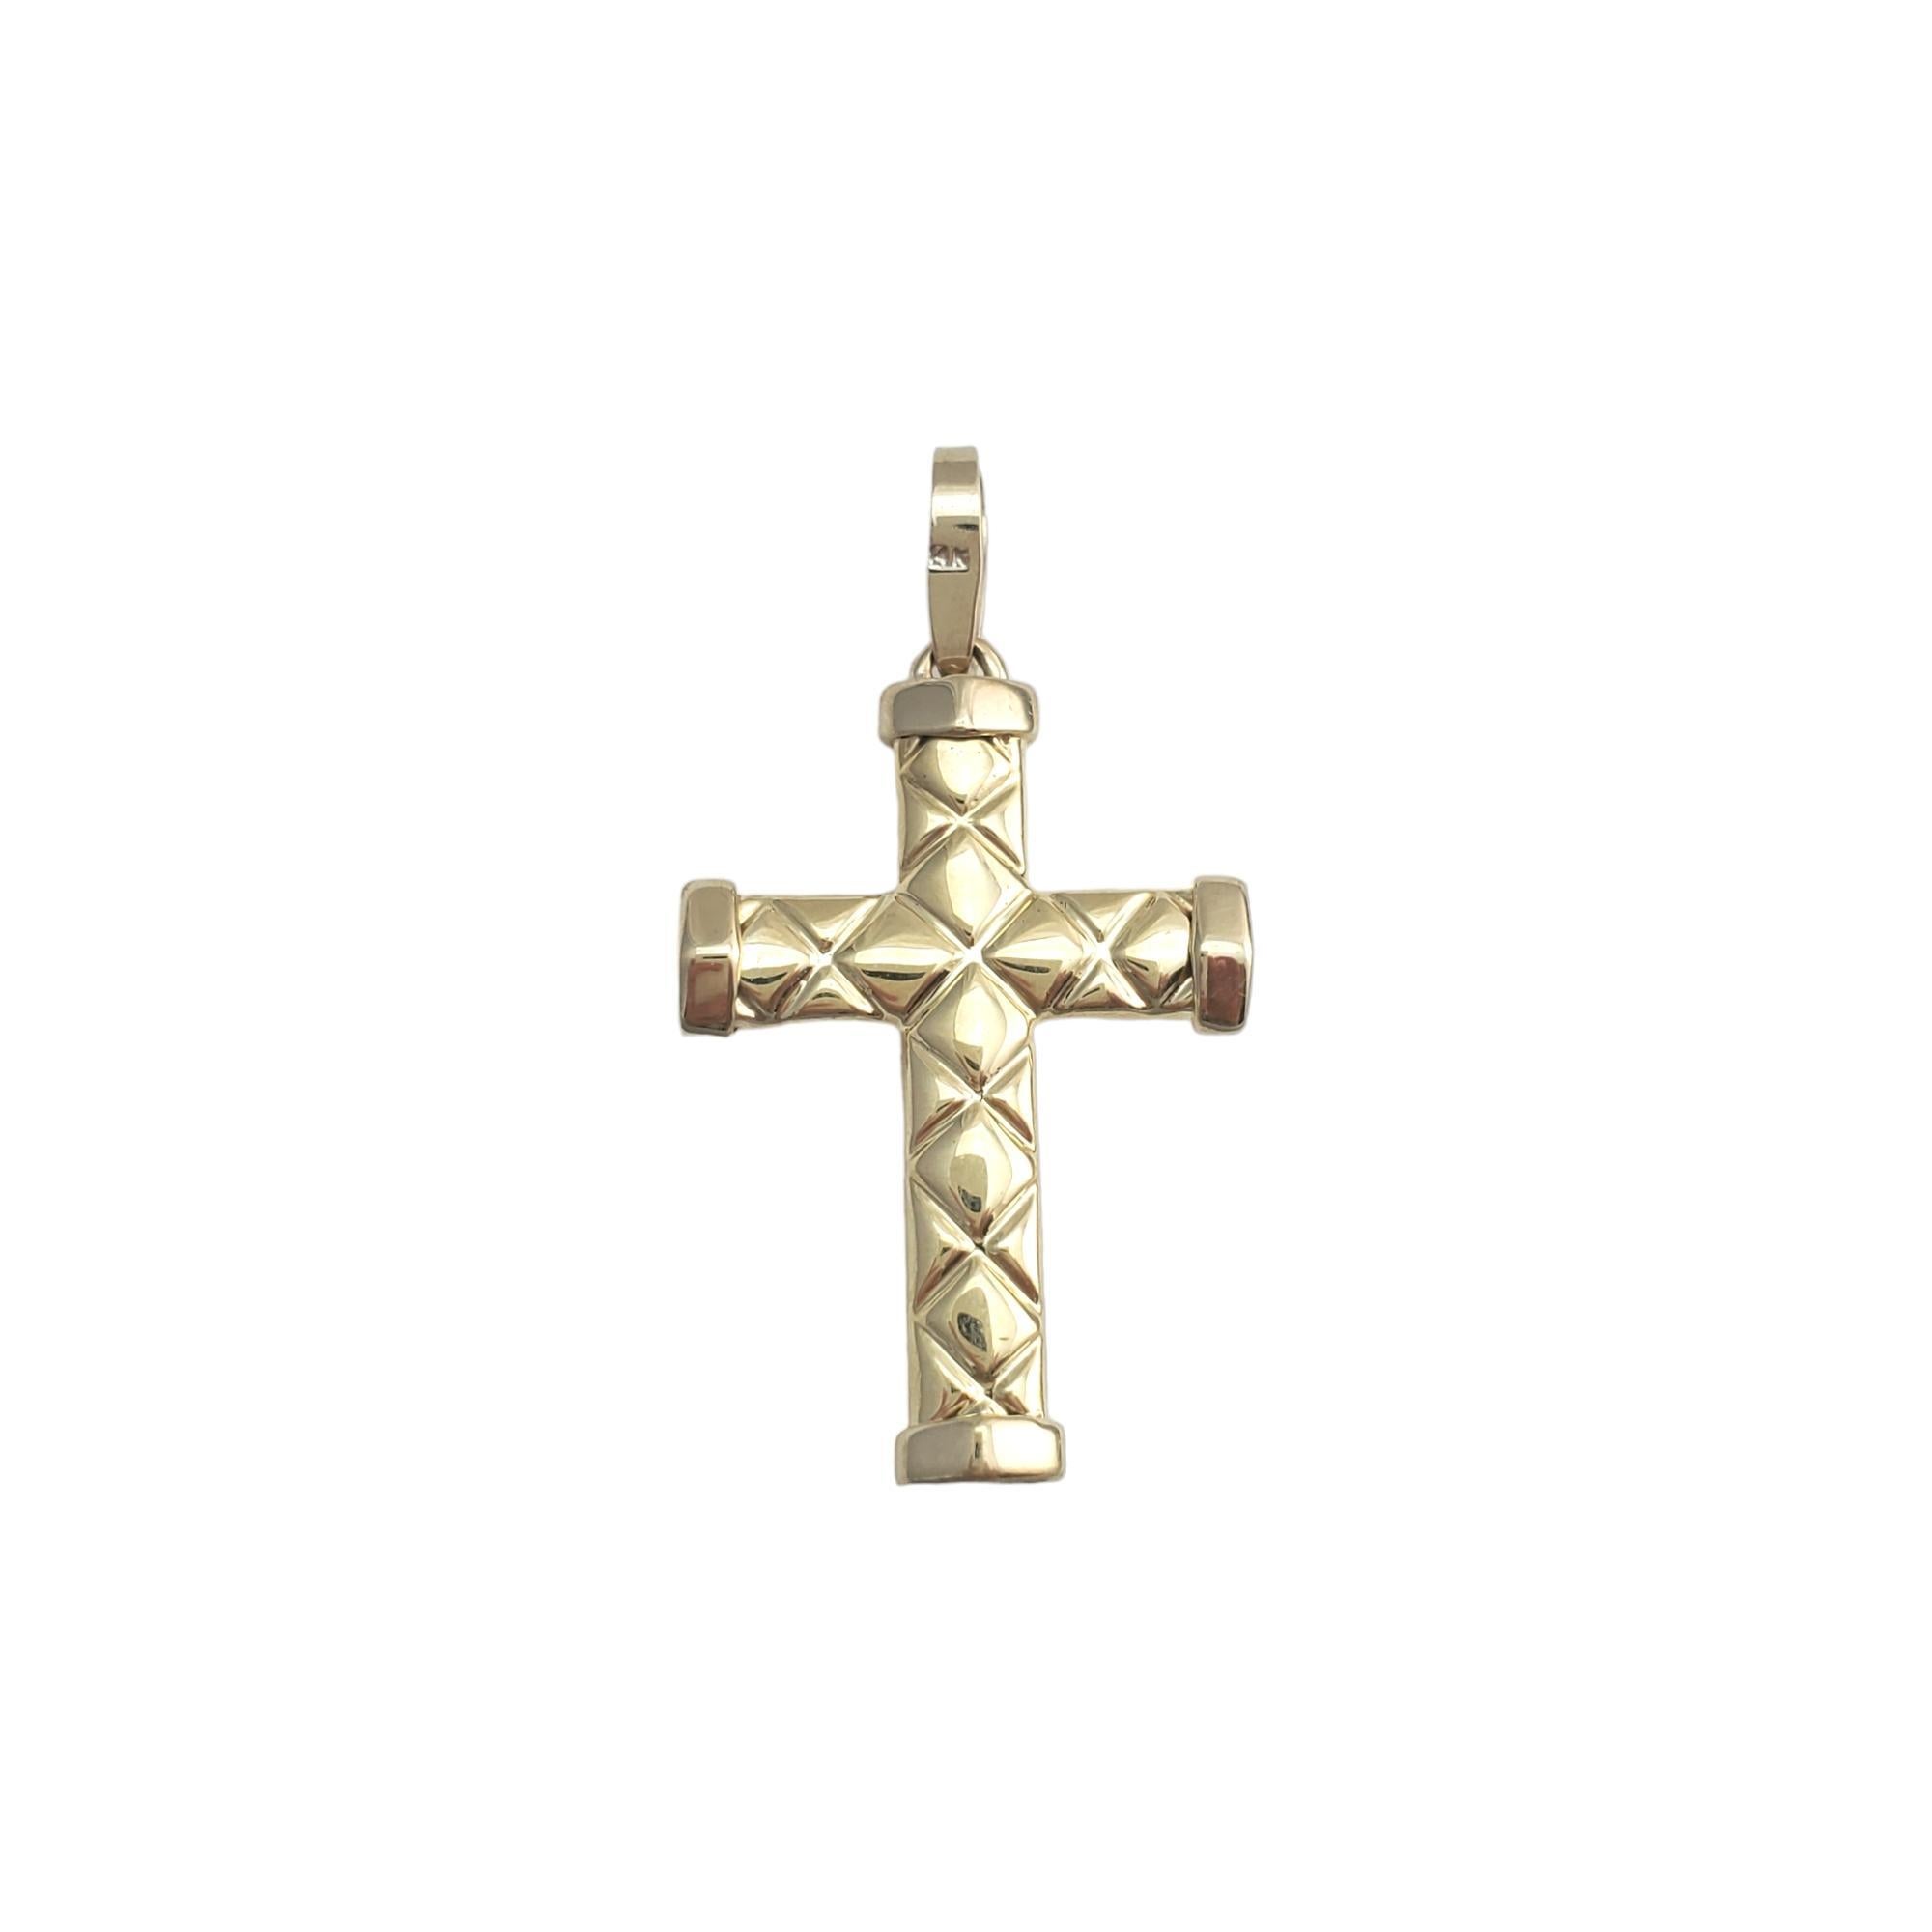 Vintage 14 karat yellow gold Cross pendant -

This lovely crucifix pendant is set in beautifully detailed 14K yellow gold.

Size: 37.8mm x 4.5mm

Stamped: 14K

Weight: 4.7gr./ 3.0dwt.

Chain not included.

Very good condition, professionally